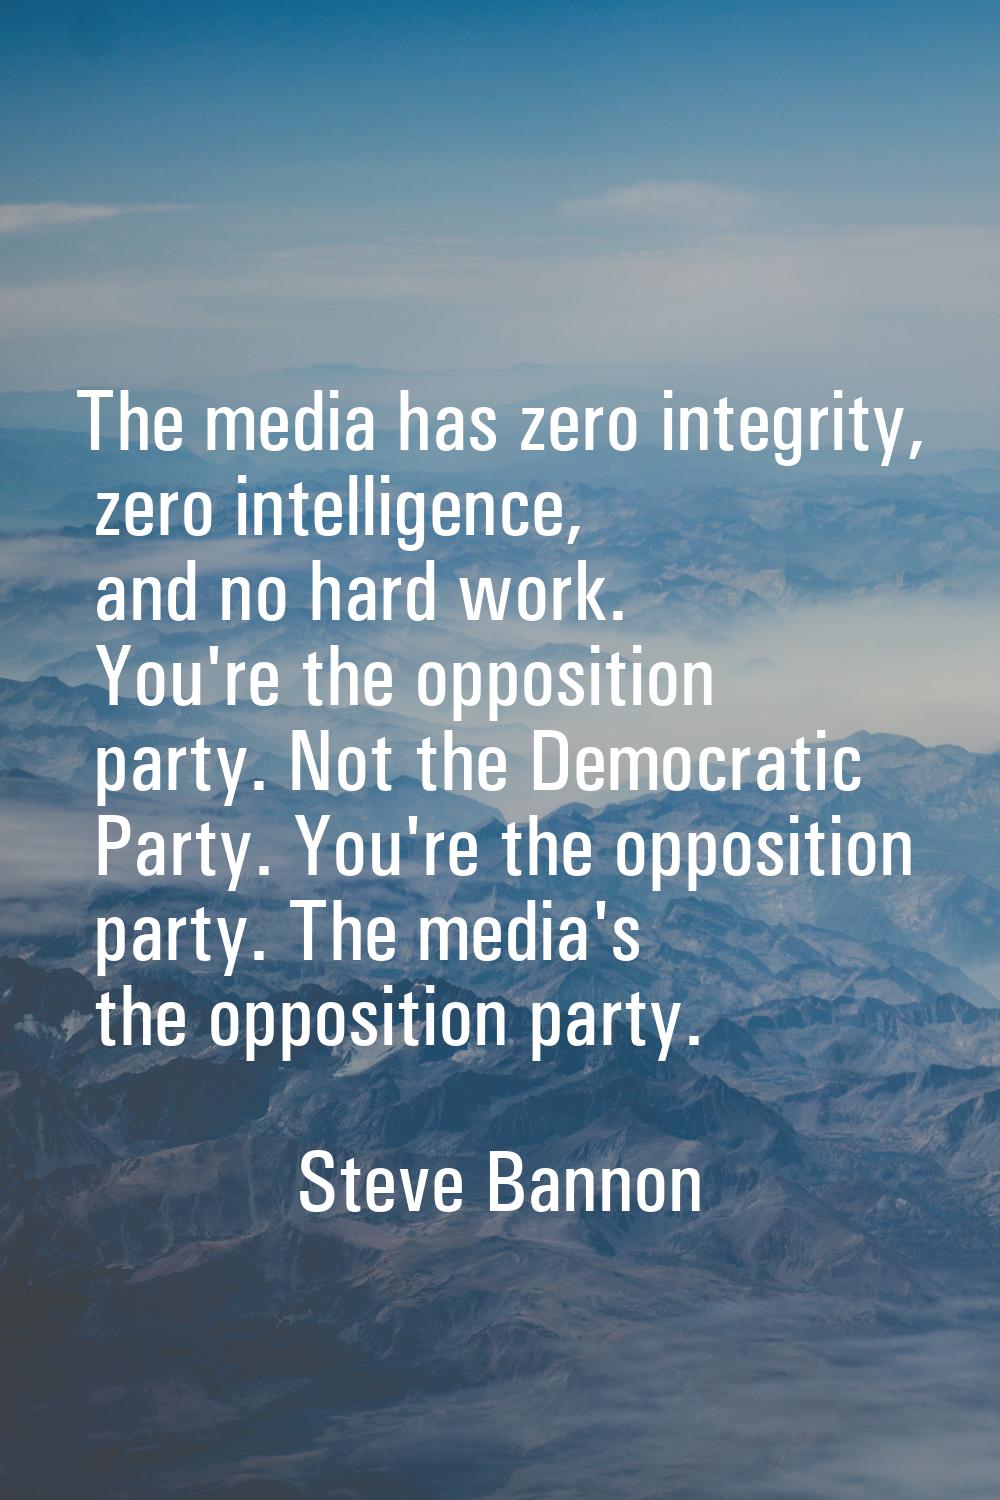 The media has zero integrity, zero intelligence, and no hard work. You're the opposition party. Not